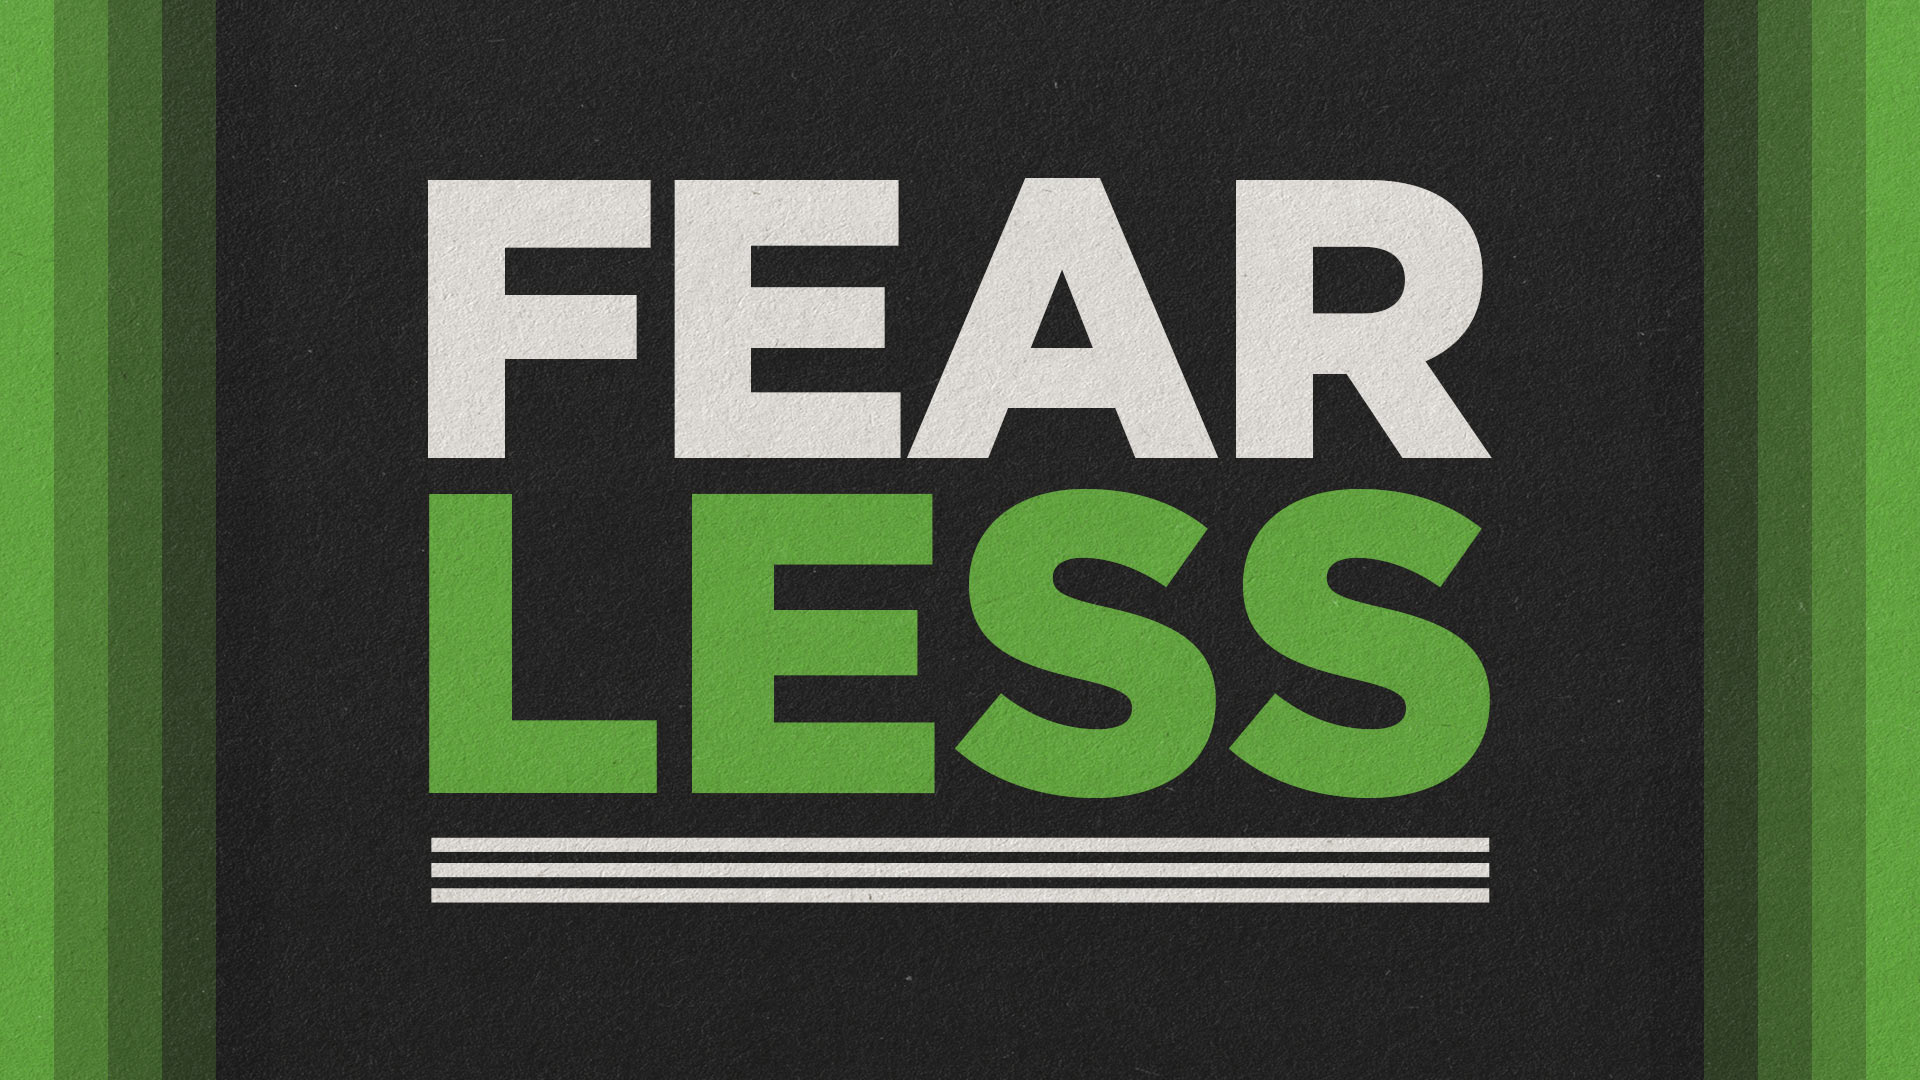   FEARLESS